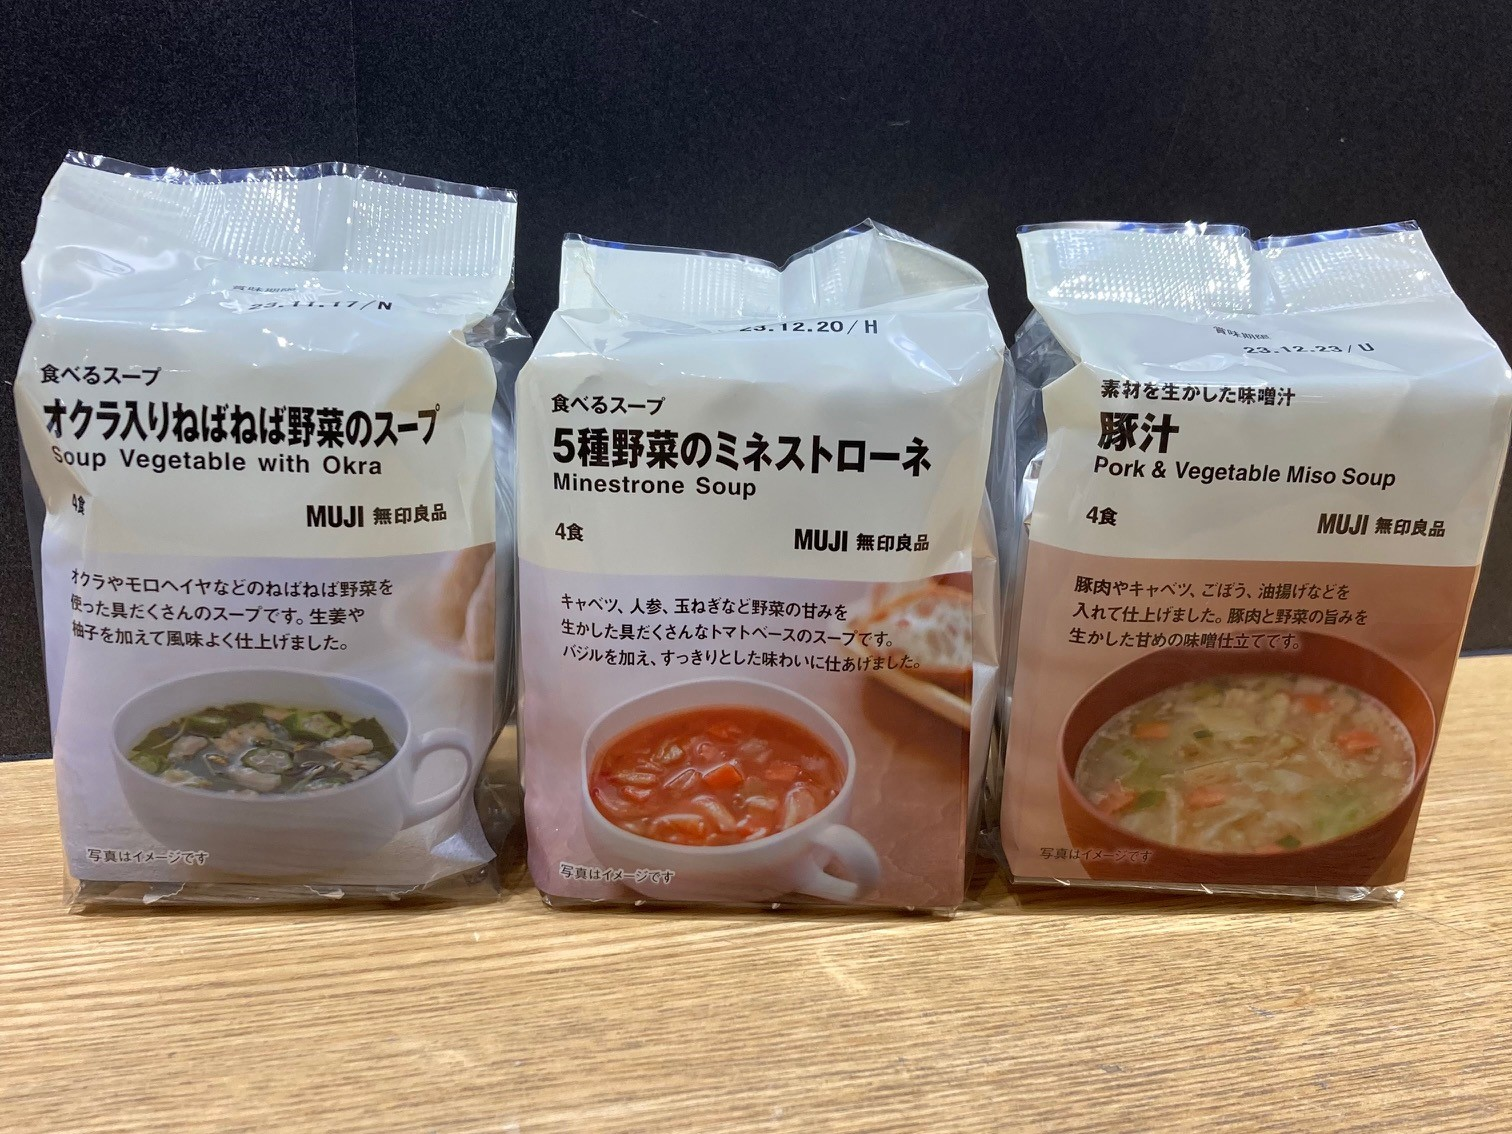 Photo of the Freeze Dried Soup and Miso Soup